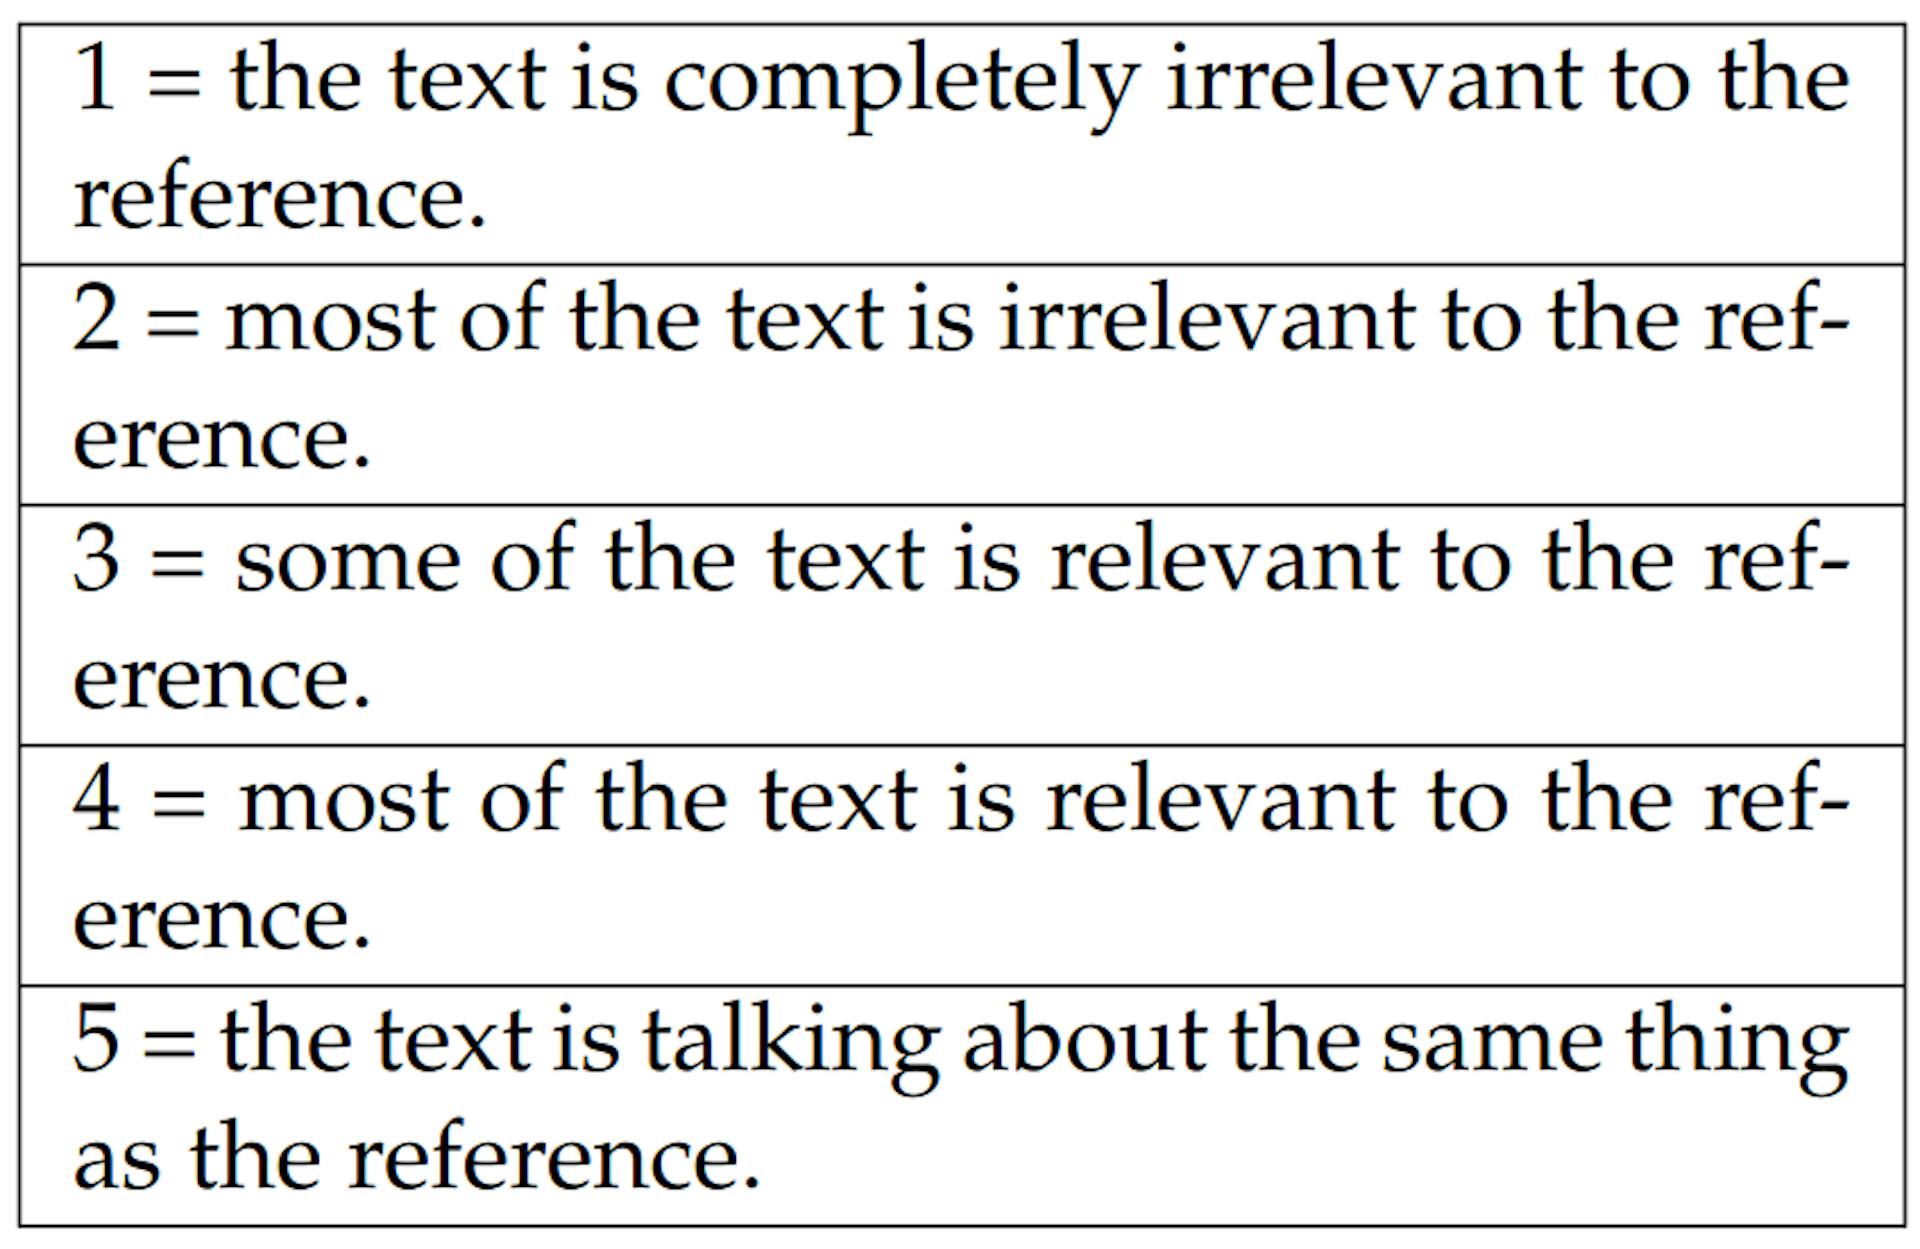 Table B.4: Rating explanations for relevance.